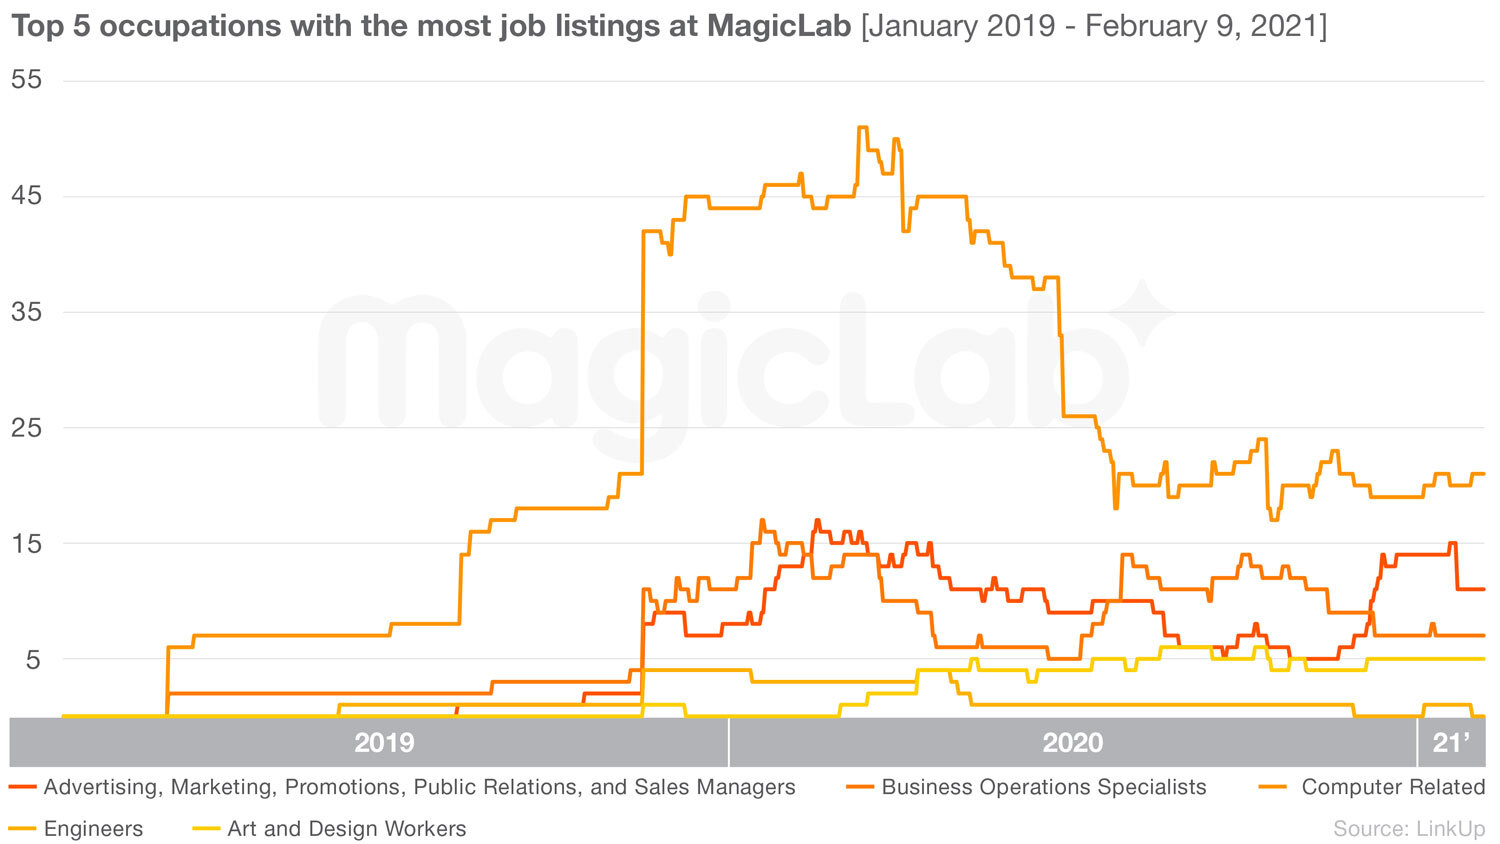 Top 5 occupations with most job listings at MagicLab